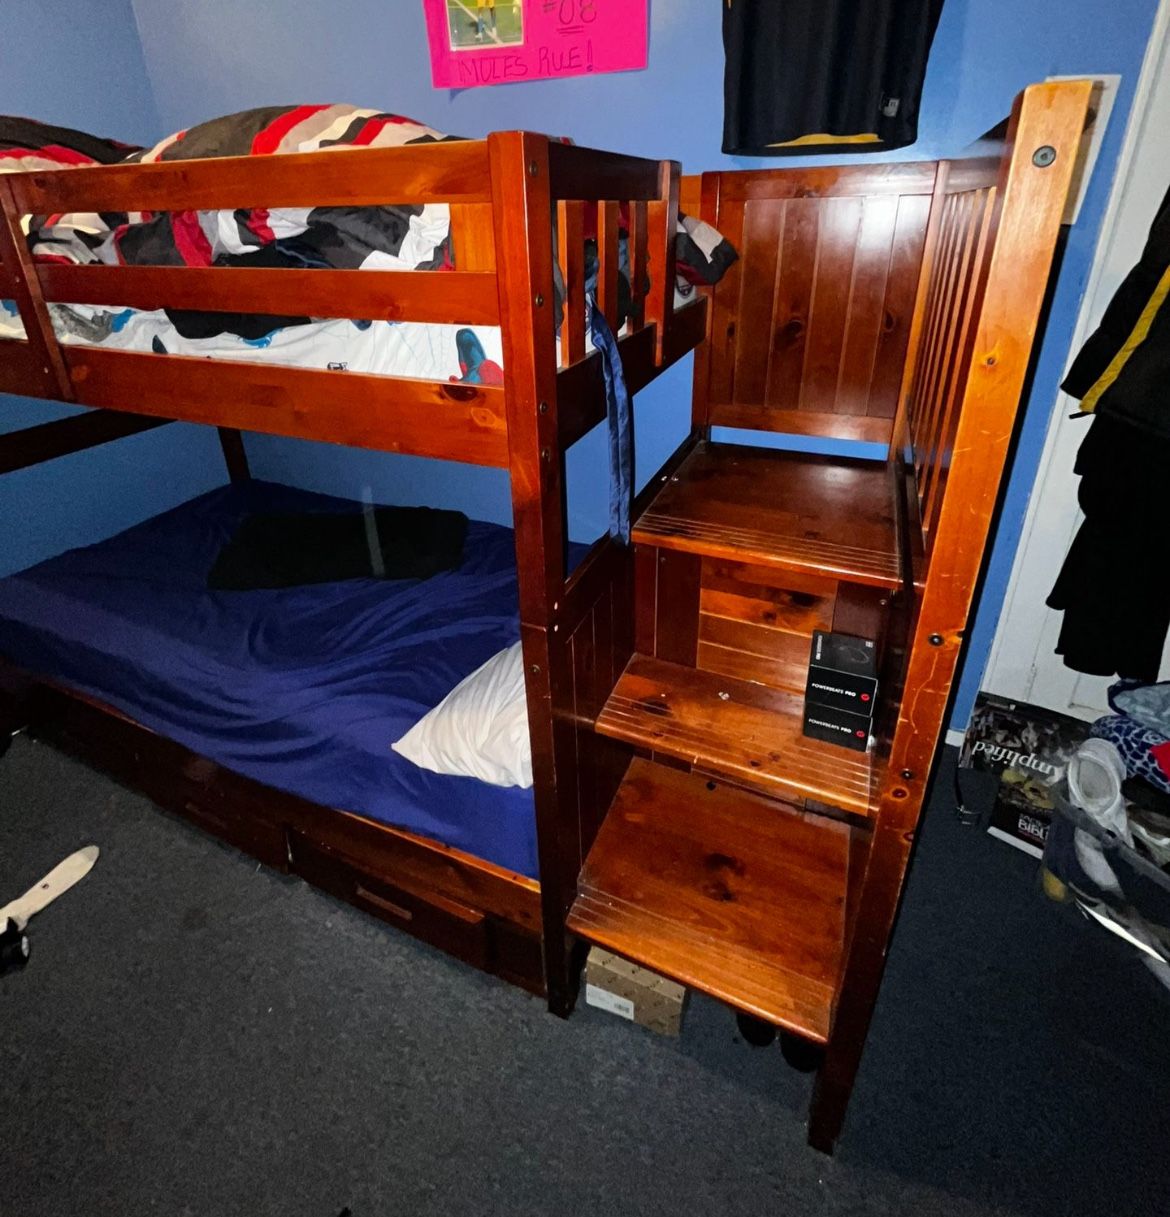 Bunk Bed W/ Drawers